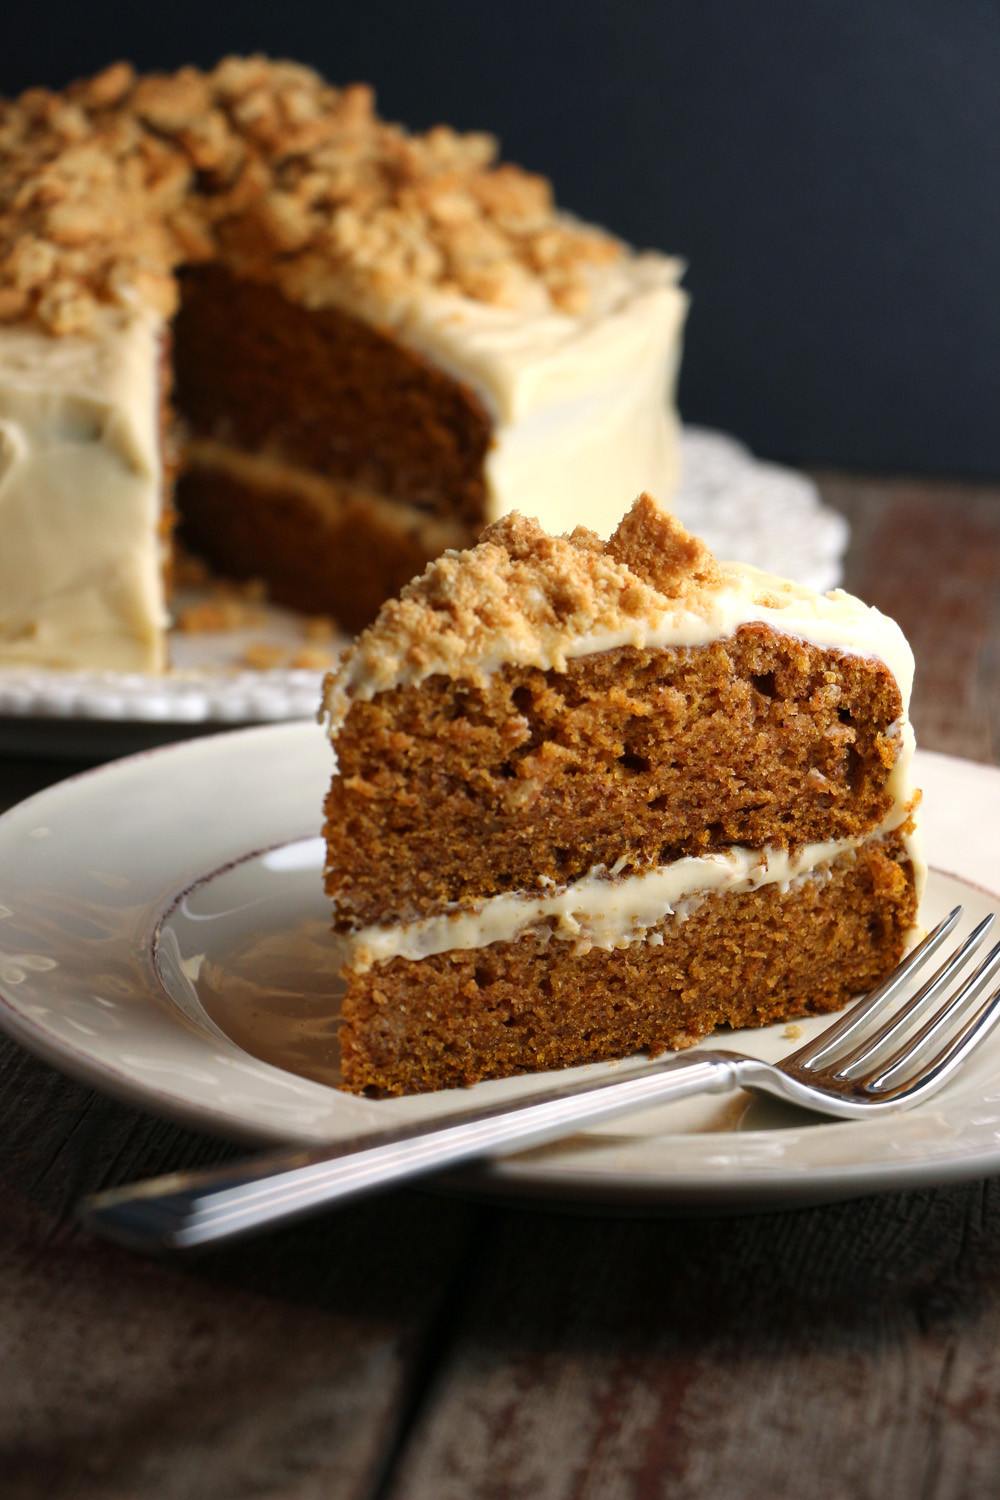 Pumpkin Cake With Cream Cheese Frosting
 Spiced Pumpkin Cake with Molasses Cream Cheese Frosting